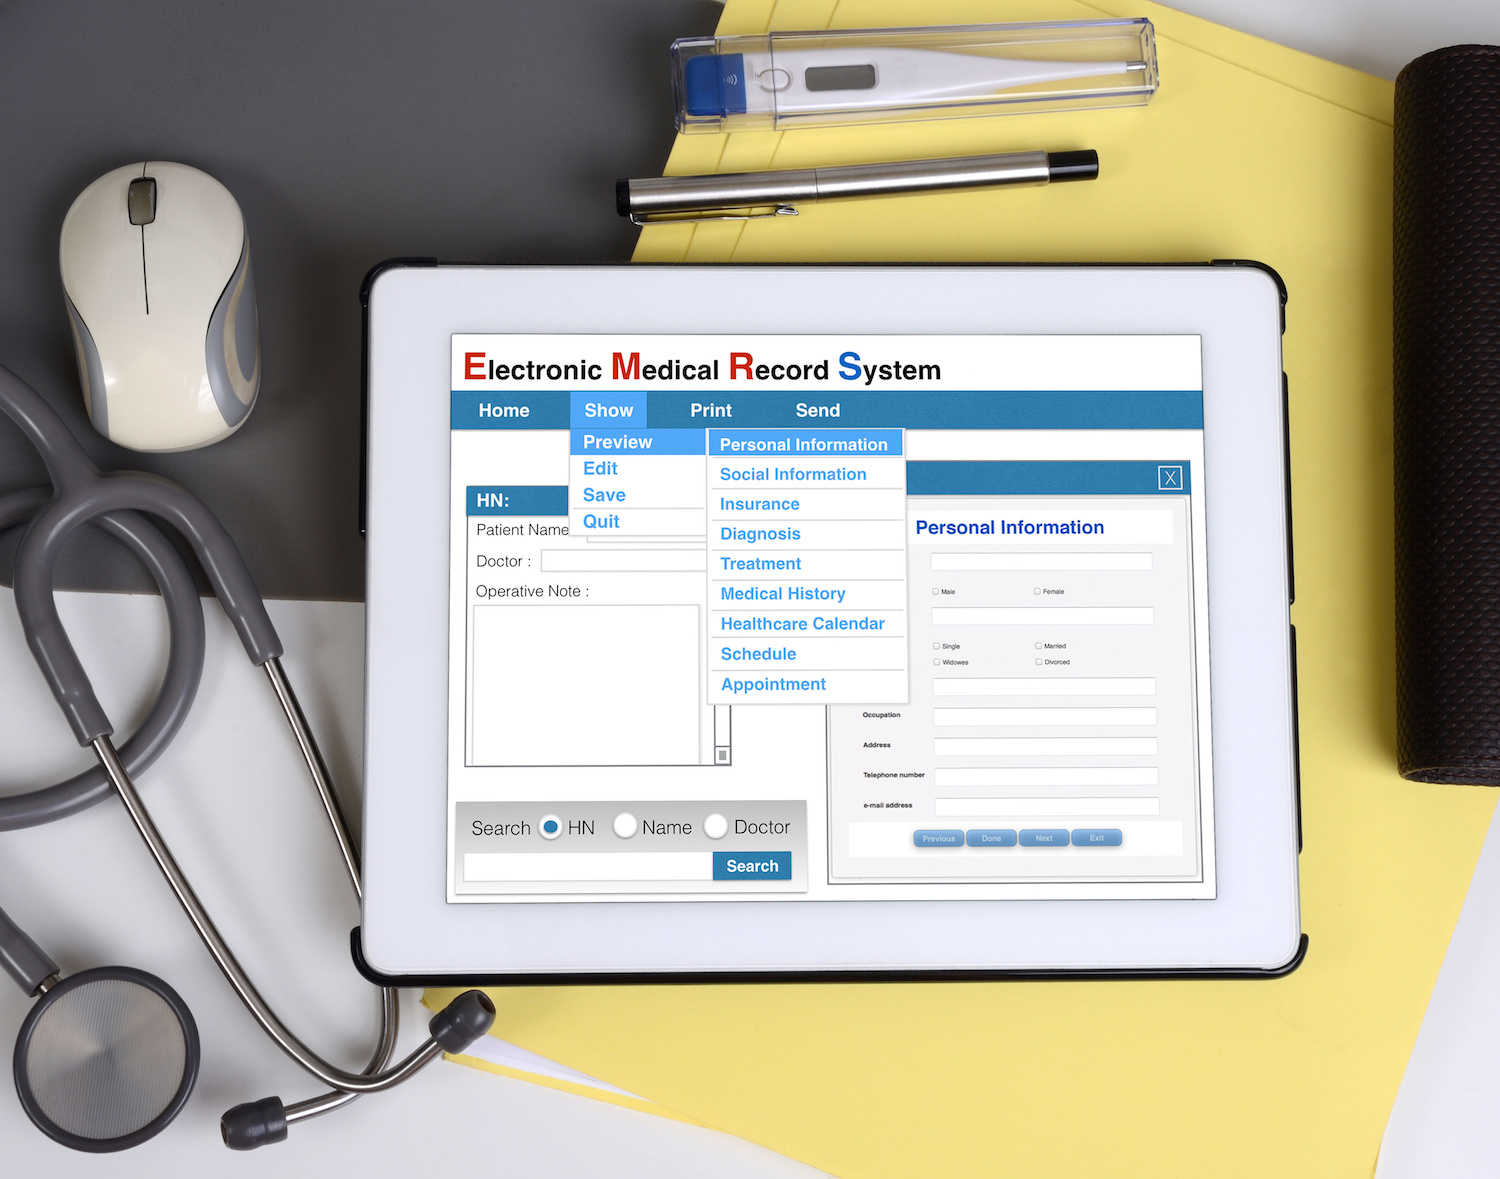 Upgrading to a new EHR system can greatly improve your heath information management, but only if staff properly use these new tools.